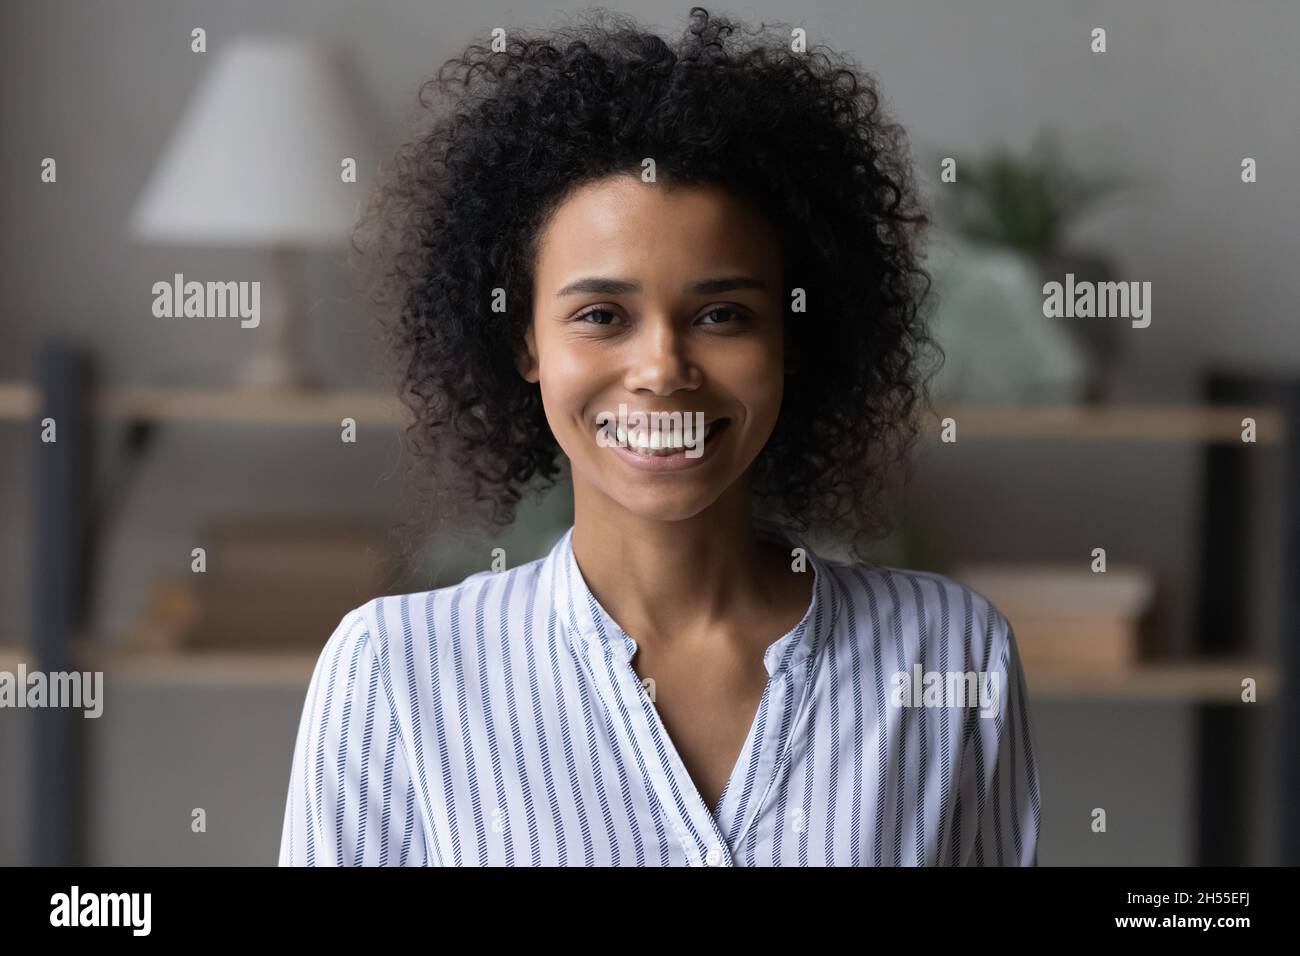 Head shot portrait of attractive smiling African American woman Stock Photo